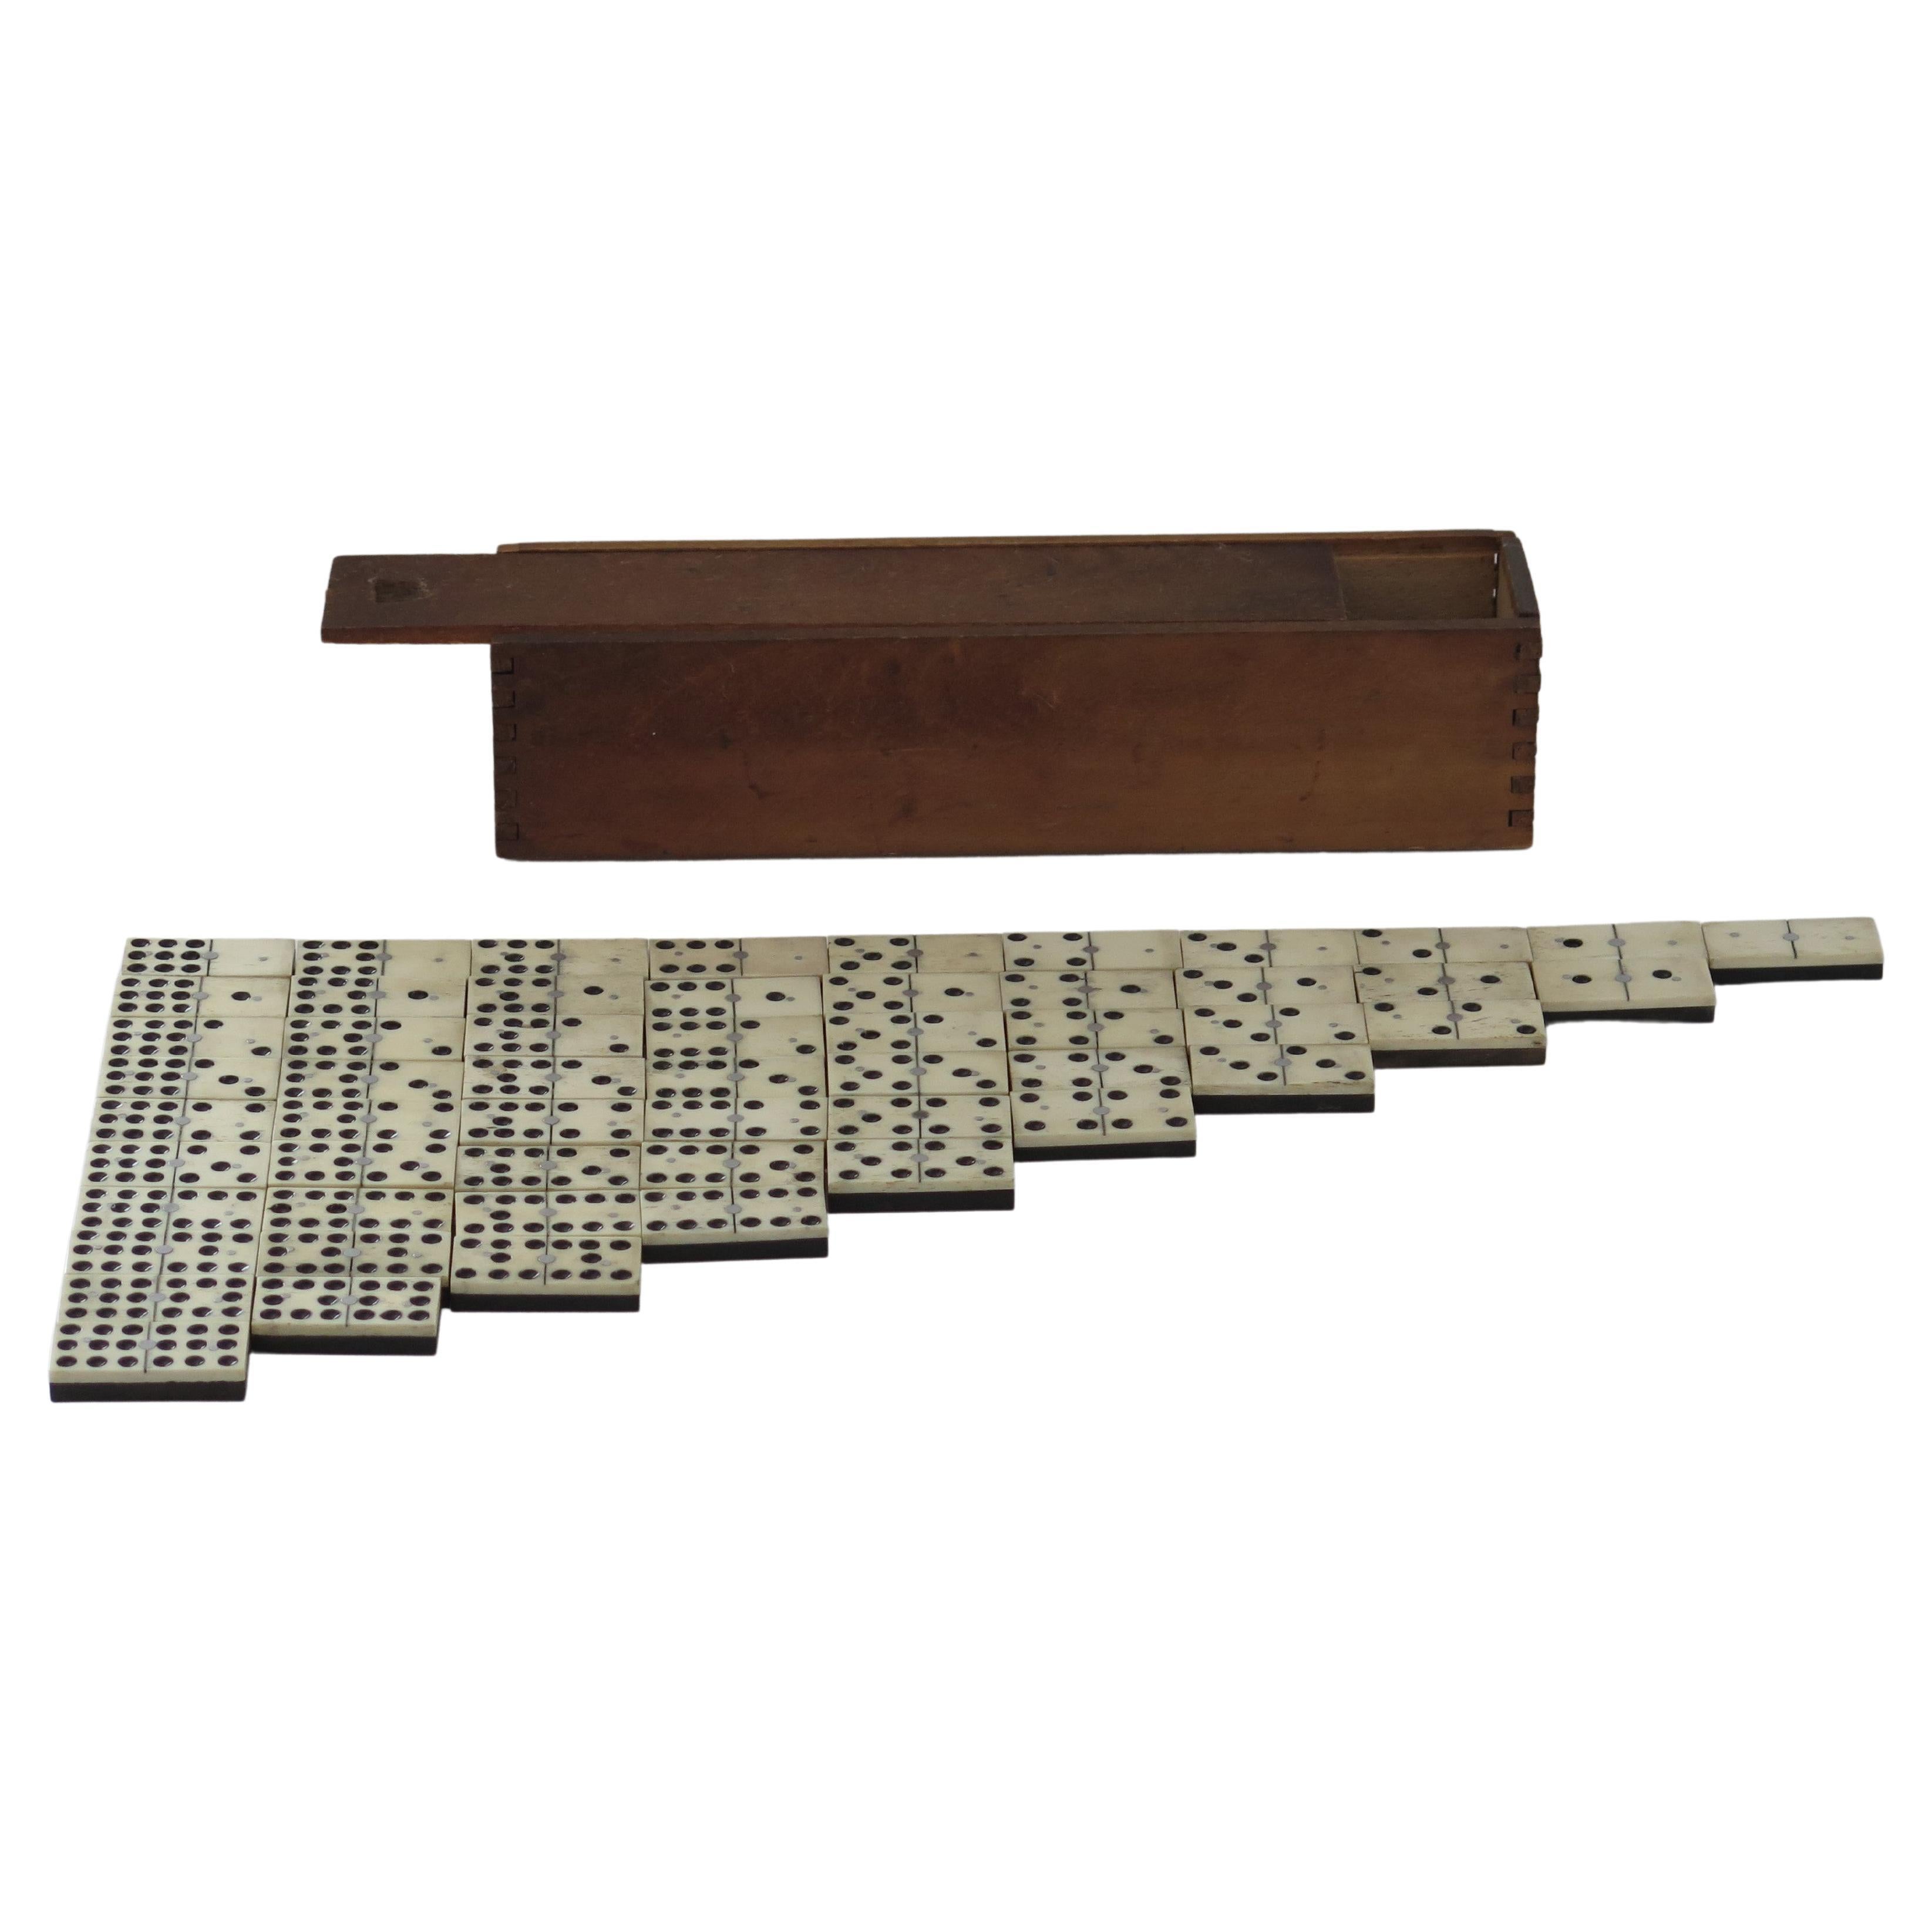 Late 19th Century "9-Spot" Dominoe Game 55 Piece Set in Jointed Hardwood Box For Sale